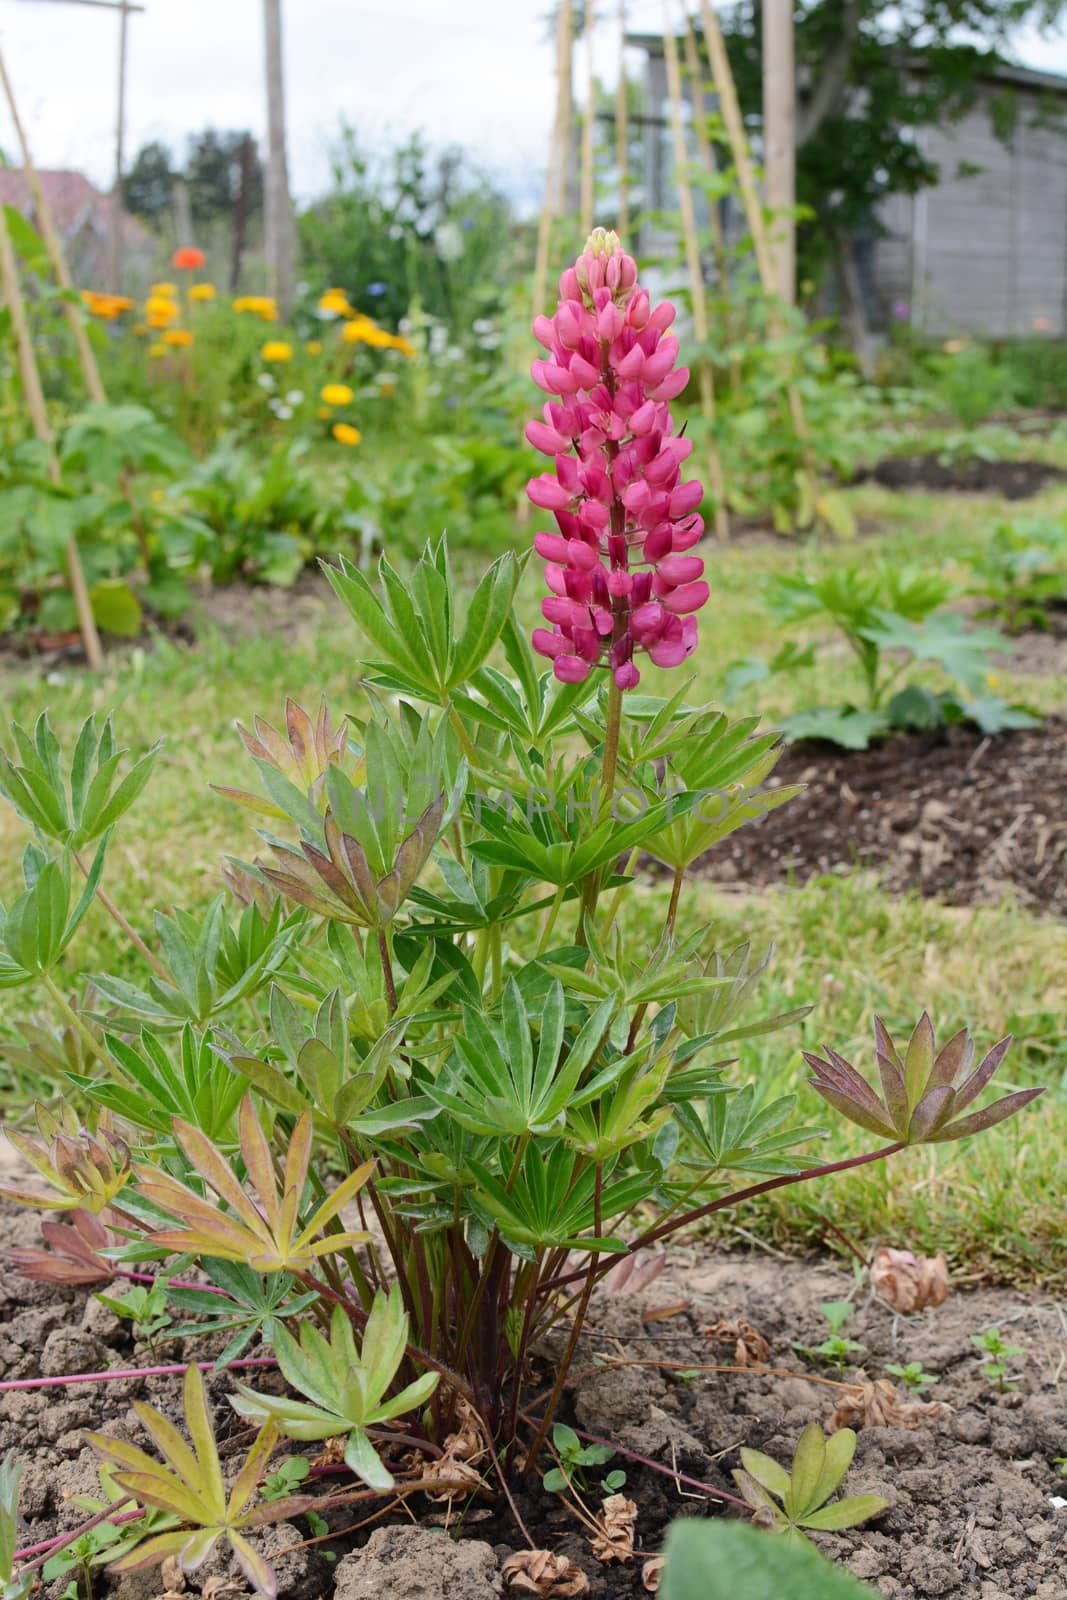 Gallery pink lupin plant, Lupinus polyphyllus, flowering in a rural garden